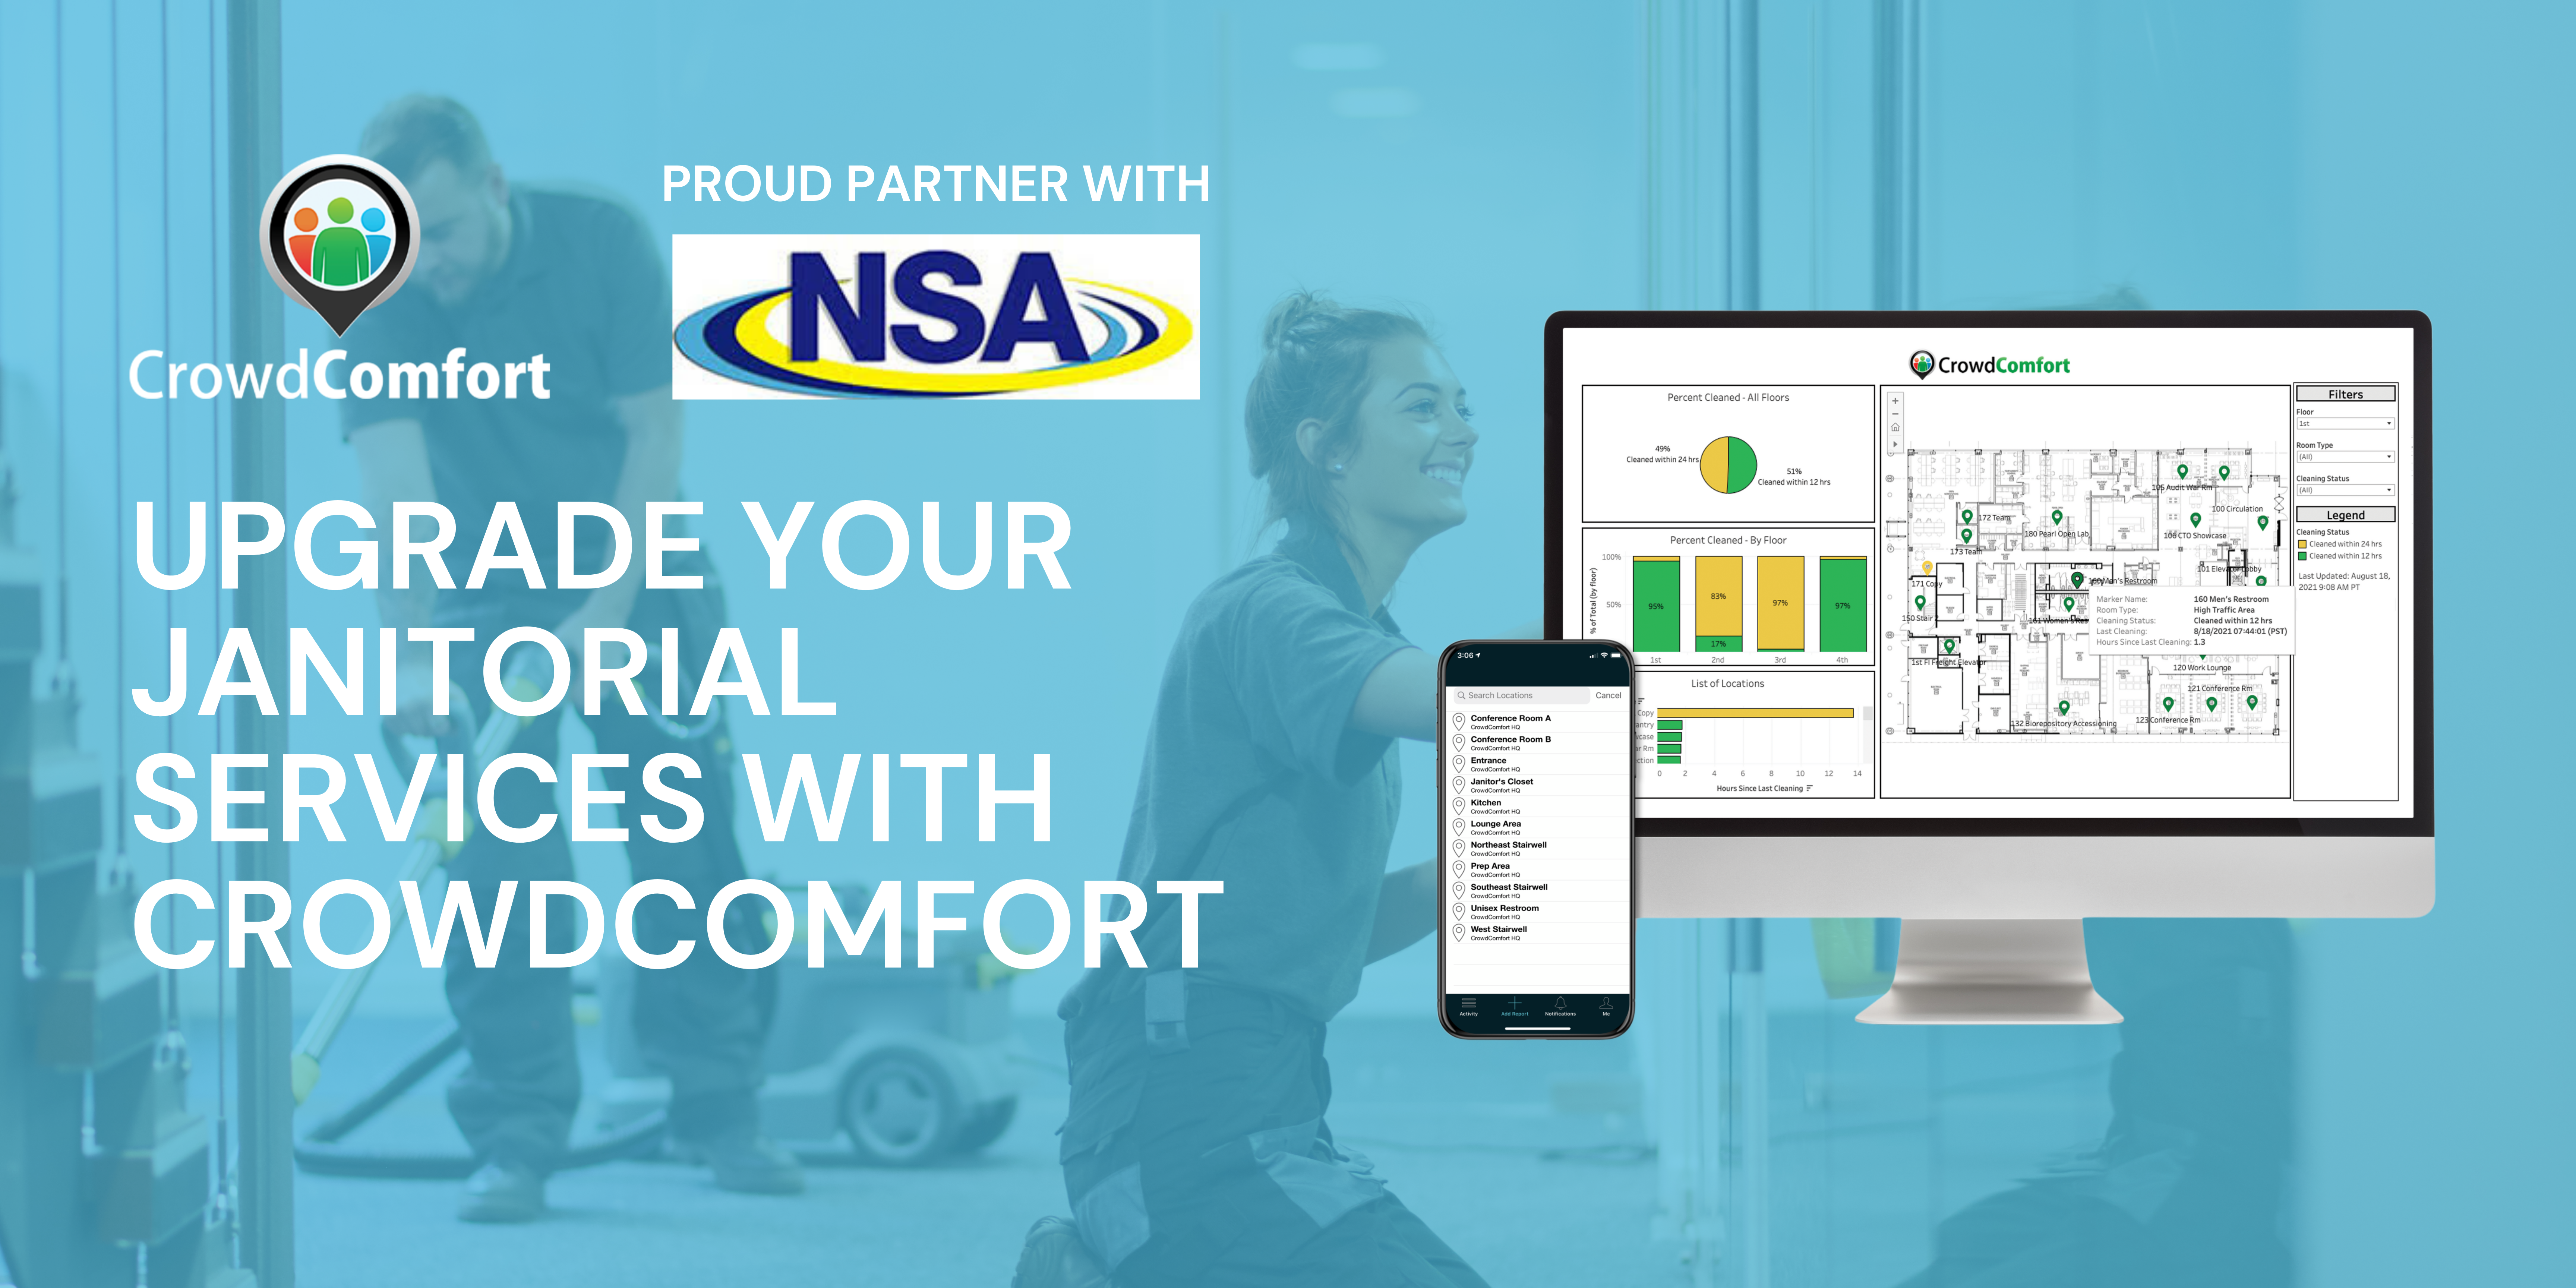 National Service Alliance (NSA) Partnership with CrowdComfort